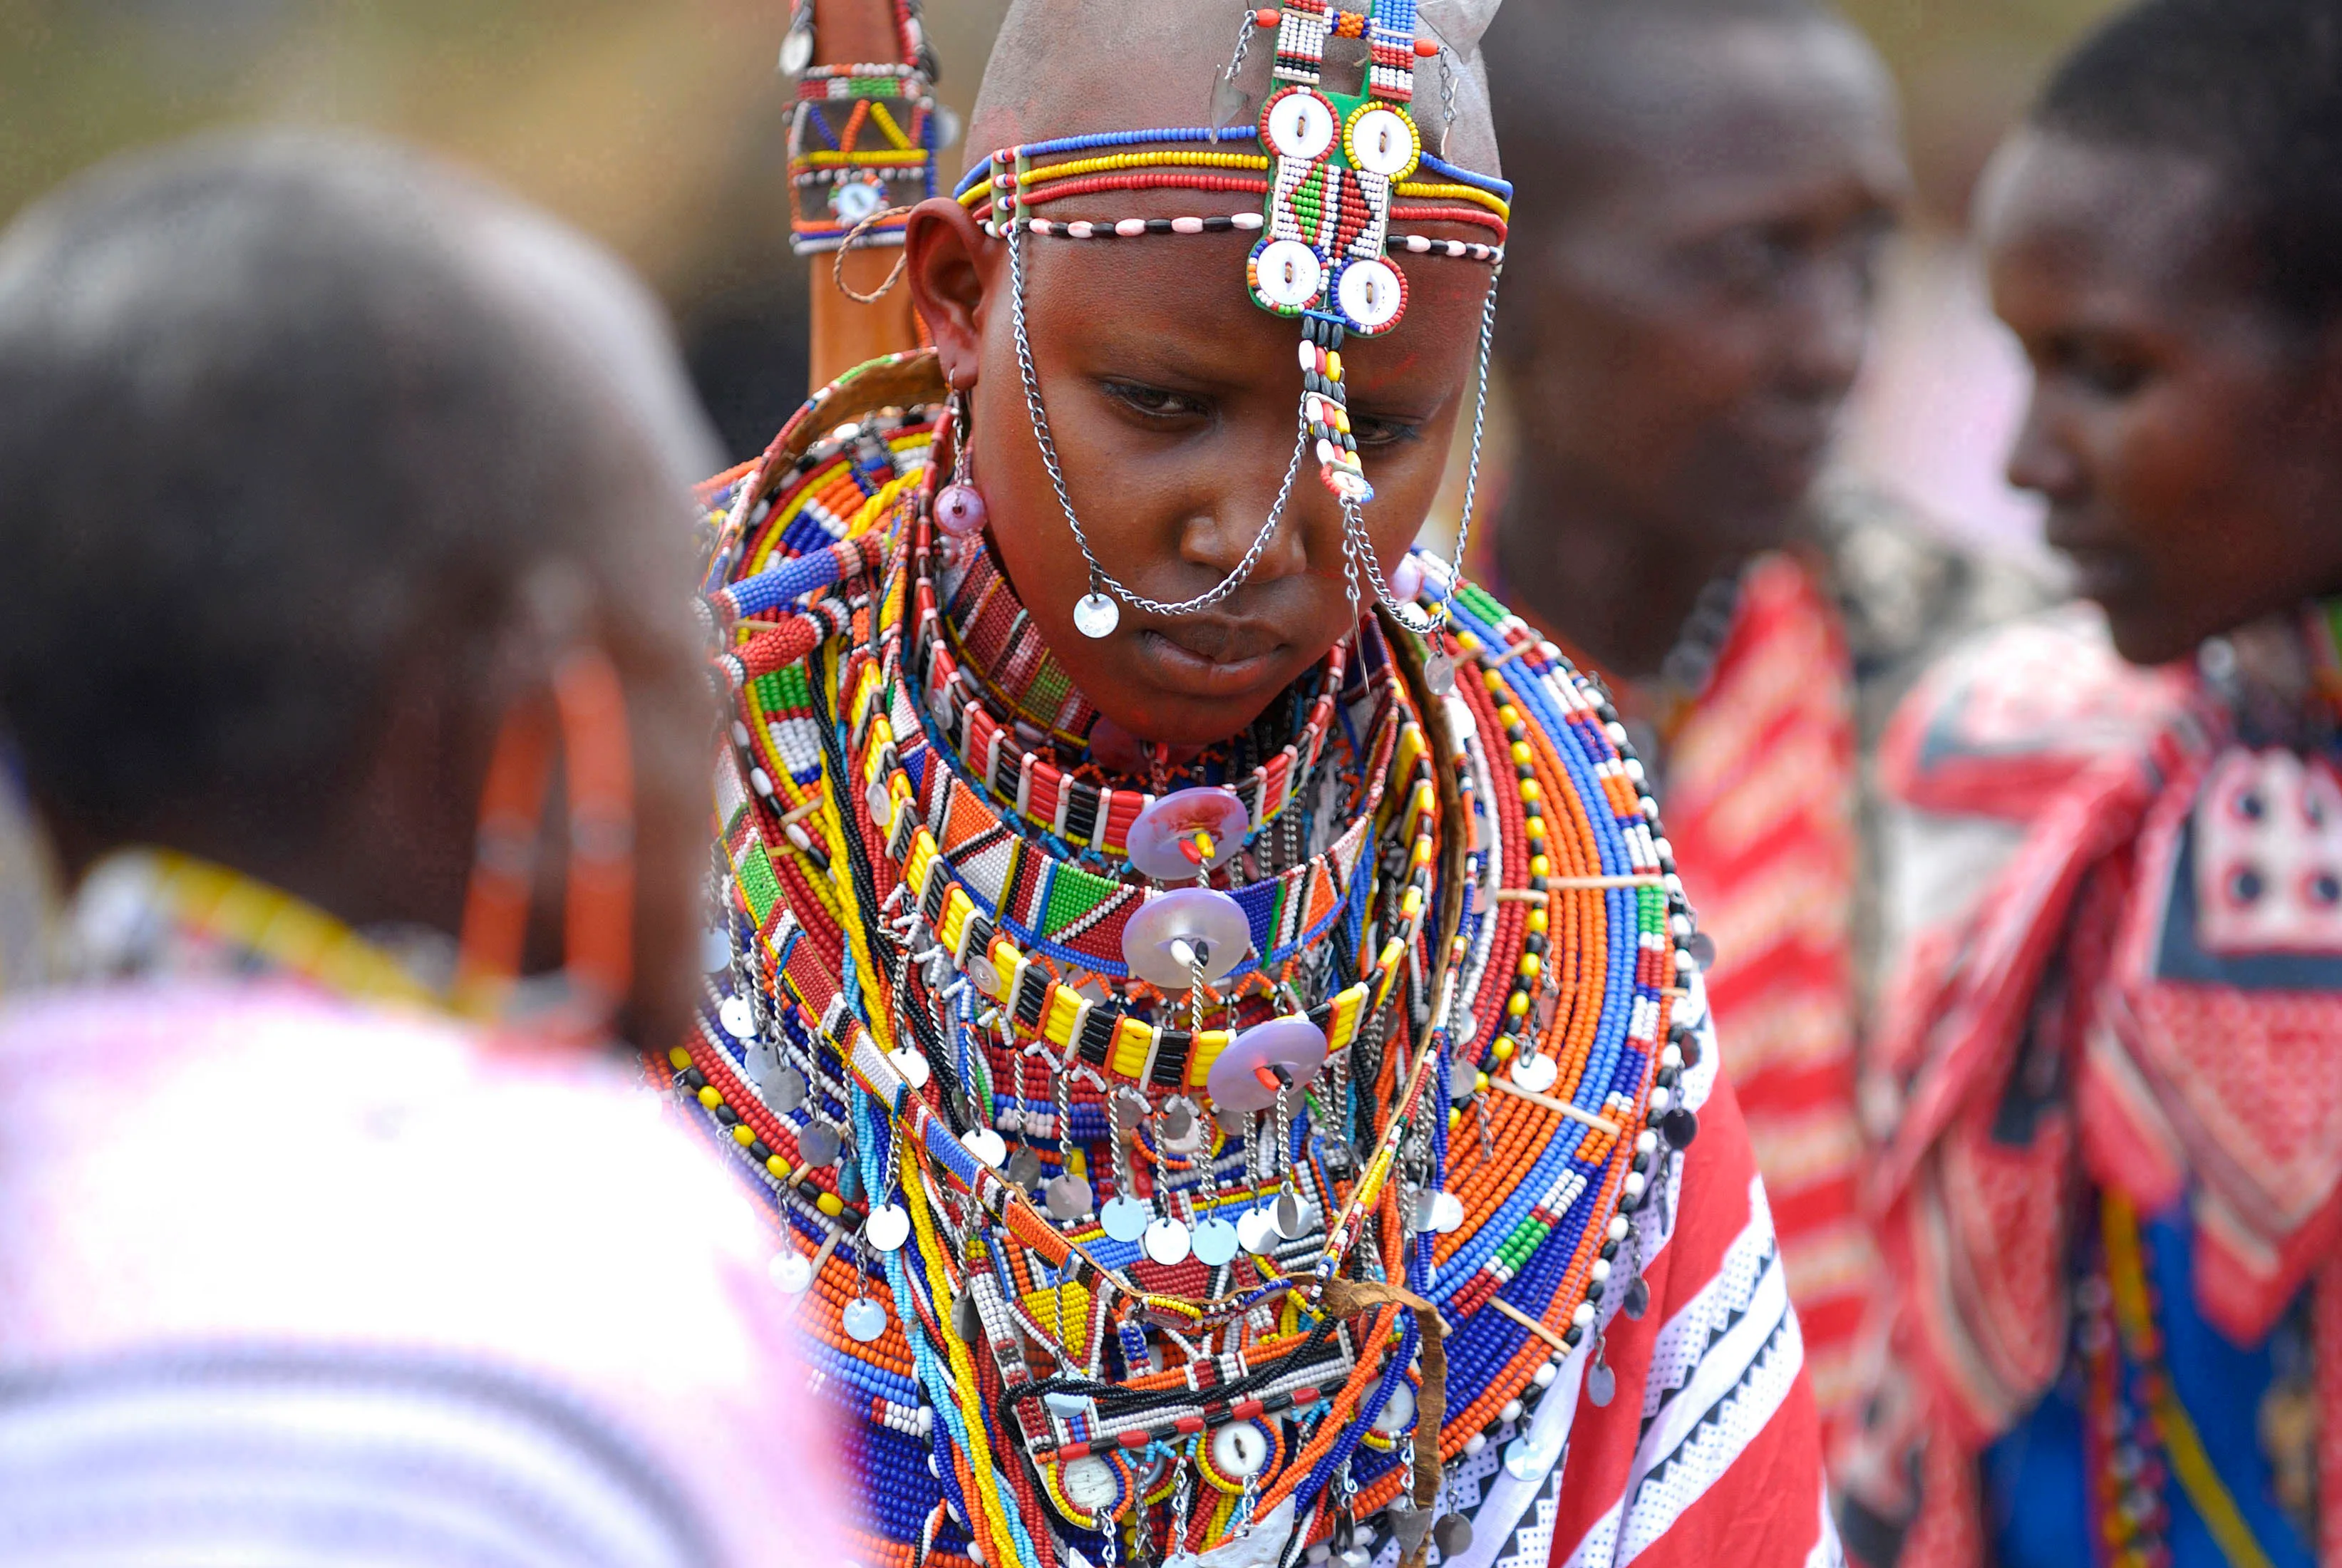 How girls' education intersects with Maasai culture in Kenya